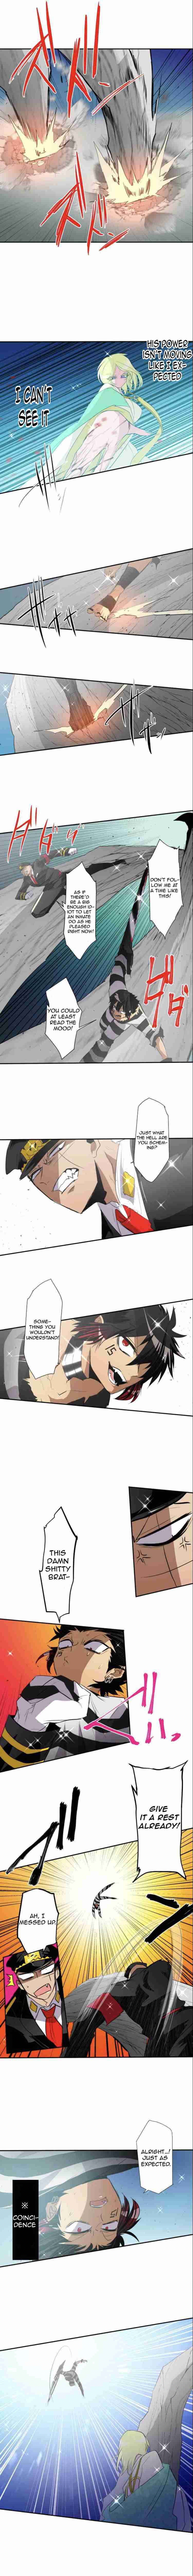 Nanbaka Ch. 138 What They Both Need